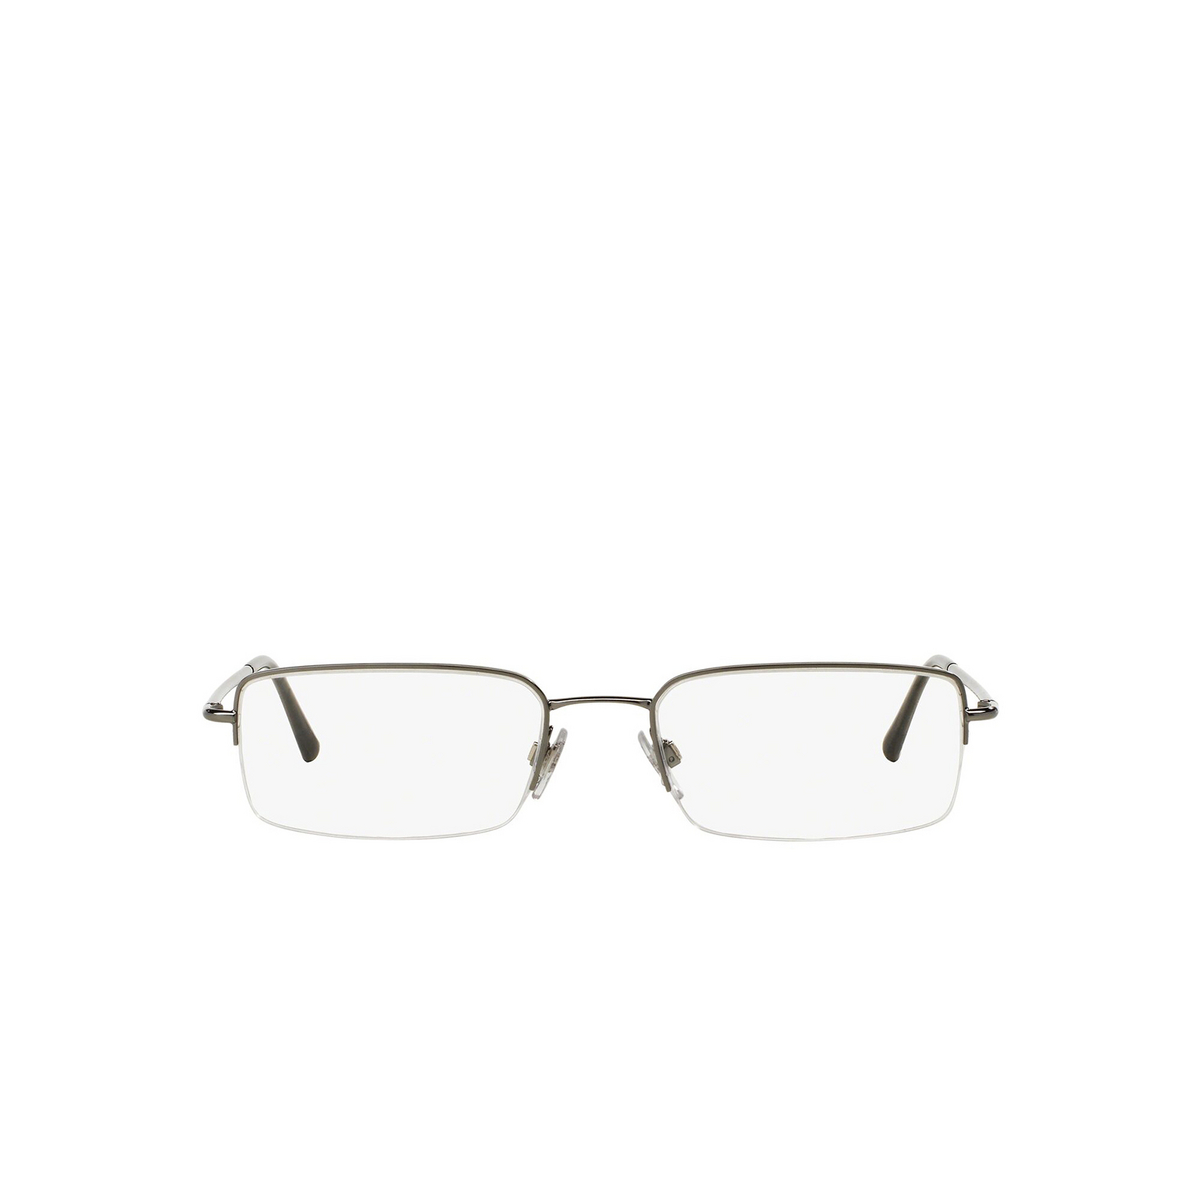 Burberry® Rectangle Eyeglasses: BE1068 color Gunmetal 1003 - front view.